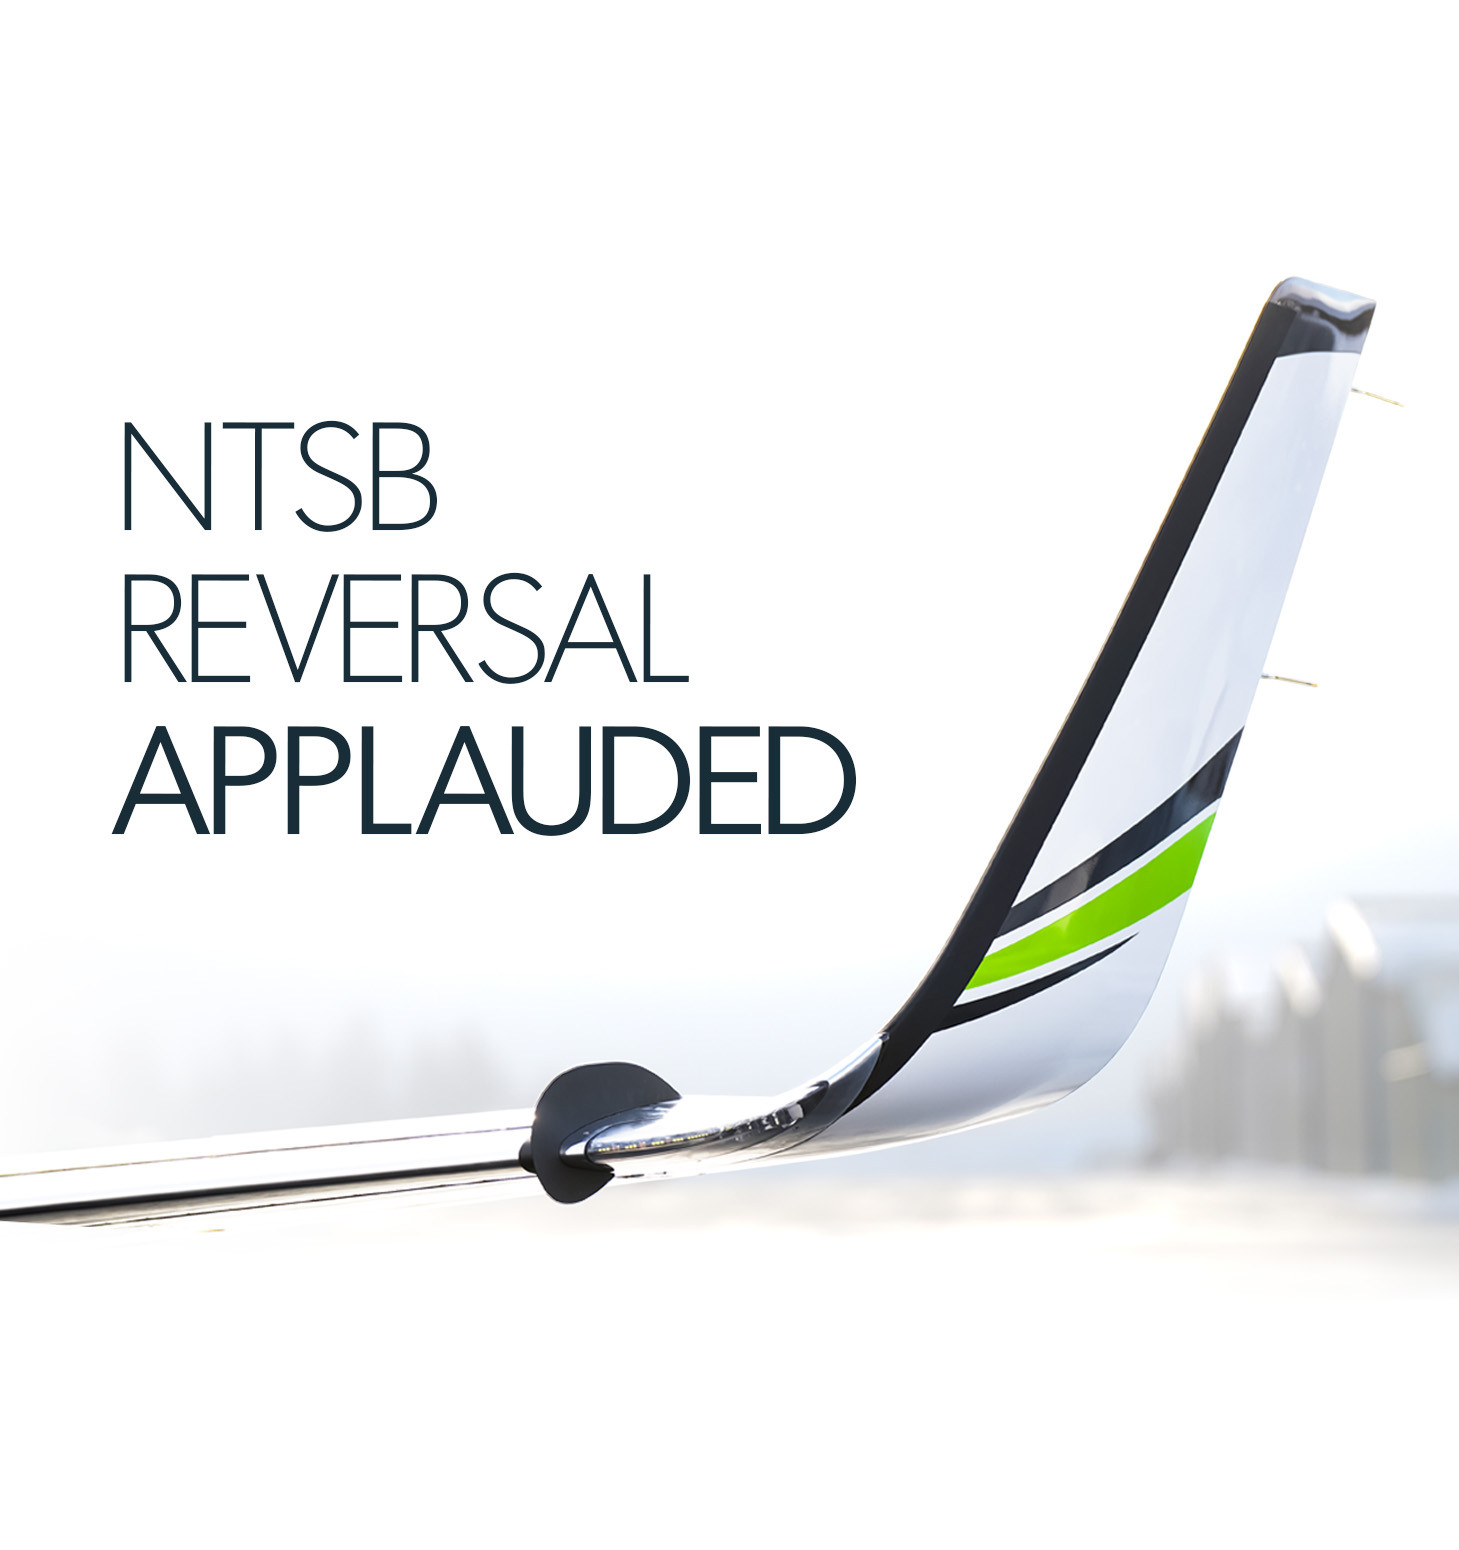 AVIATION INDUSTRY LEADERS APPLAUD NTSB & FAA REVERSAL ON INDIANA CITATIONJET ACCIDENT